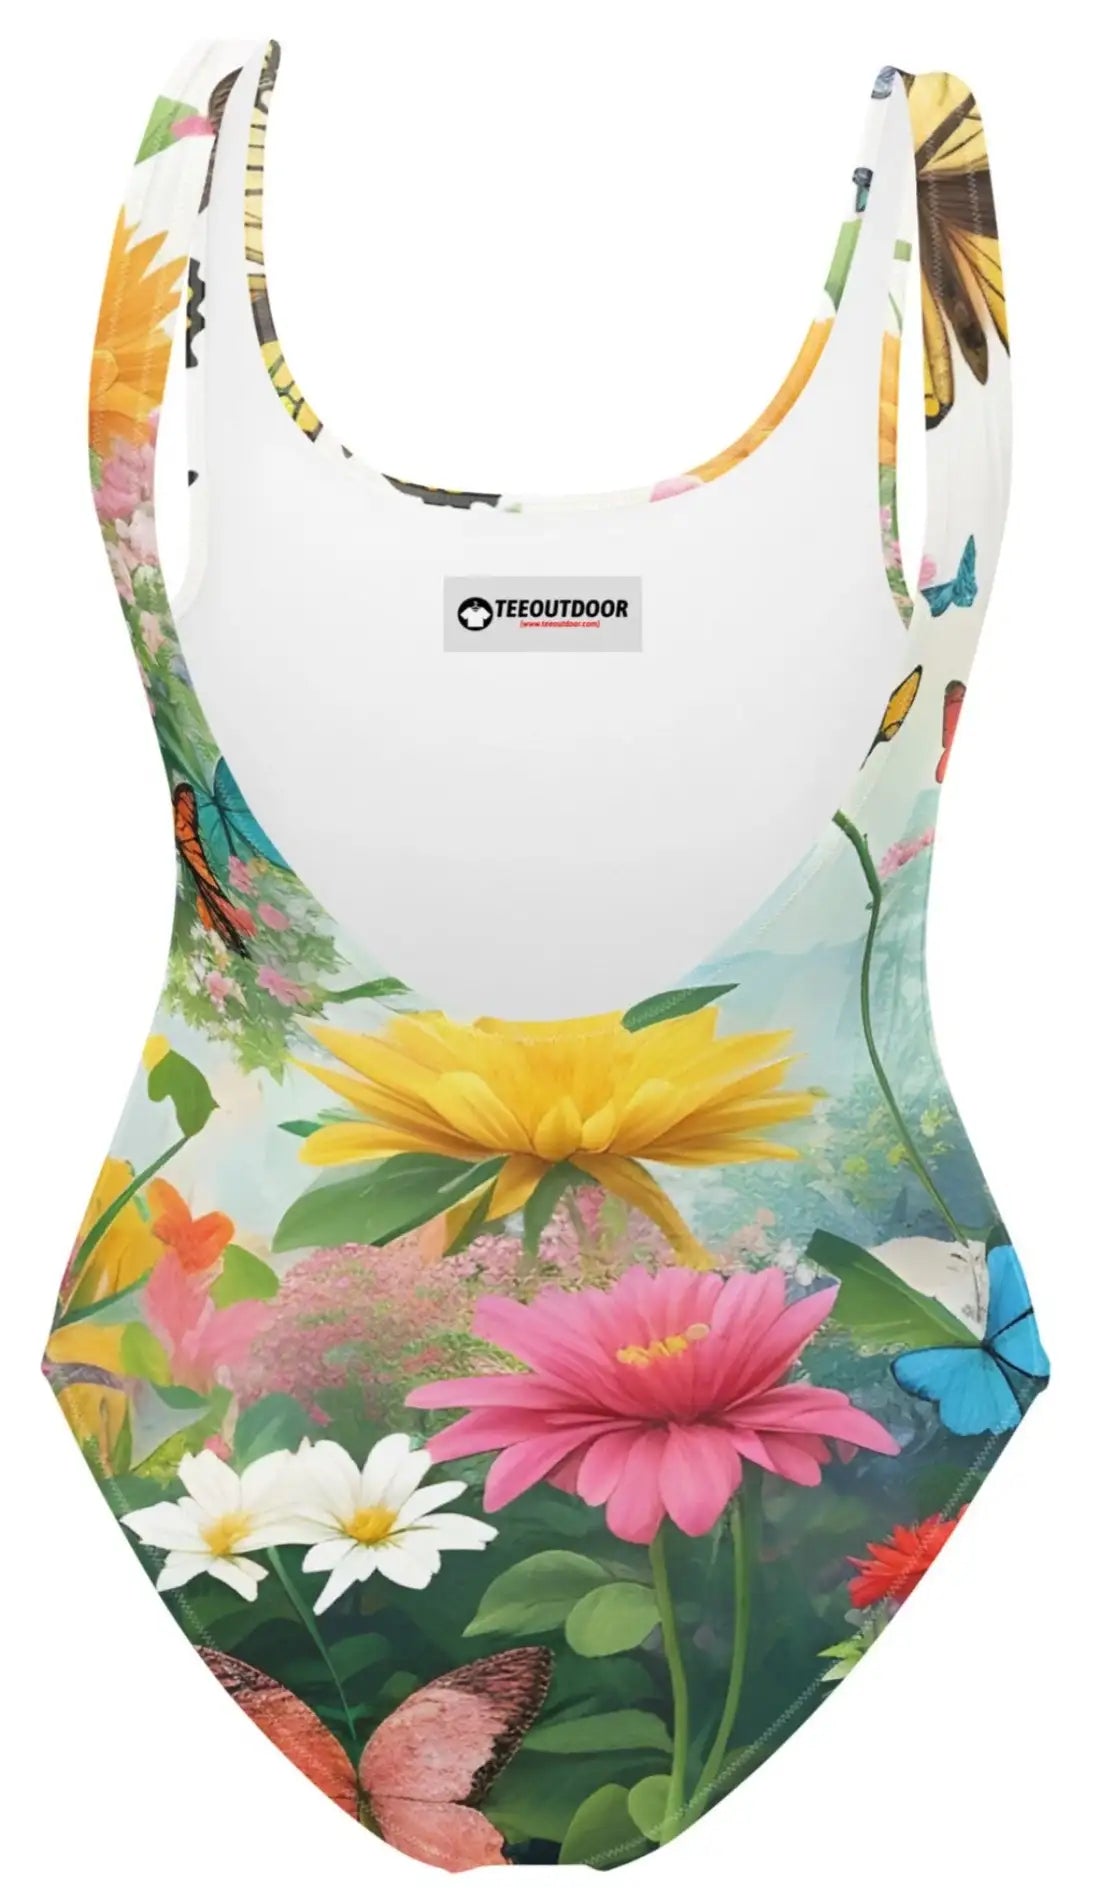 Floral Fantasy: Vibrant One-Piece Swimsuit